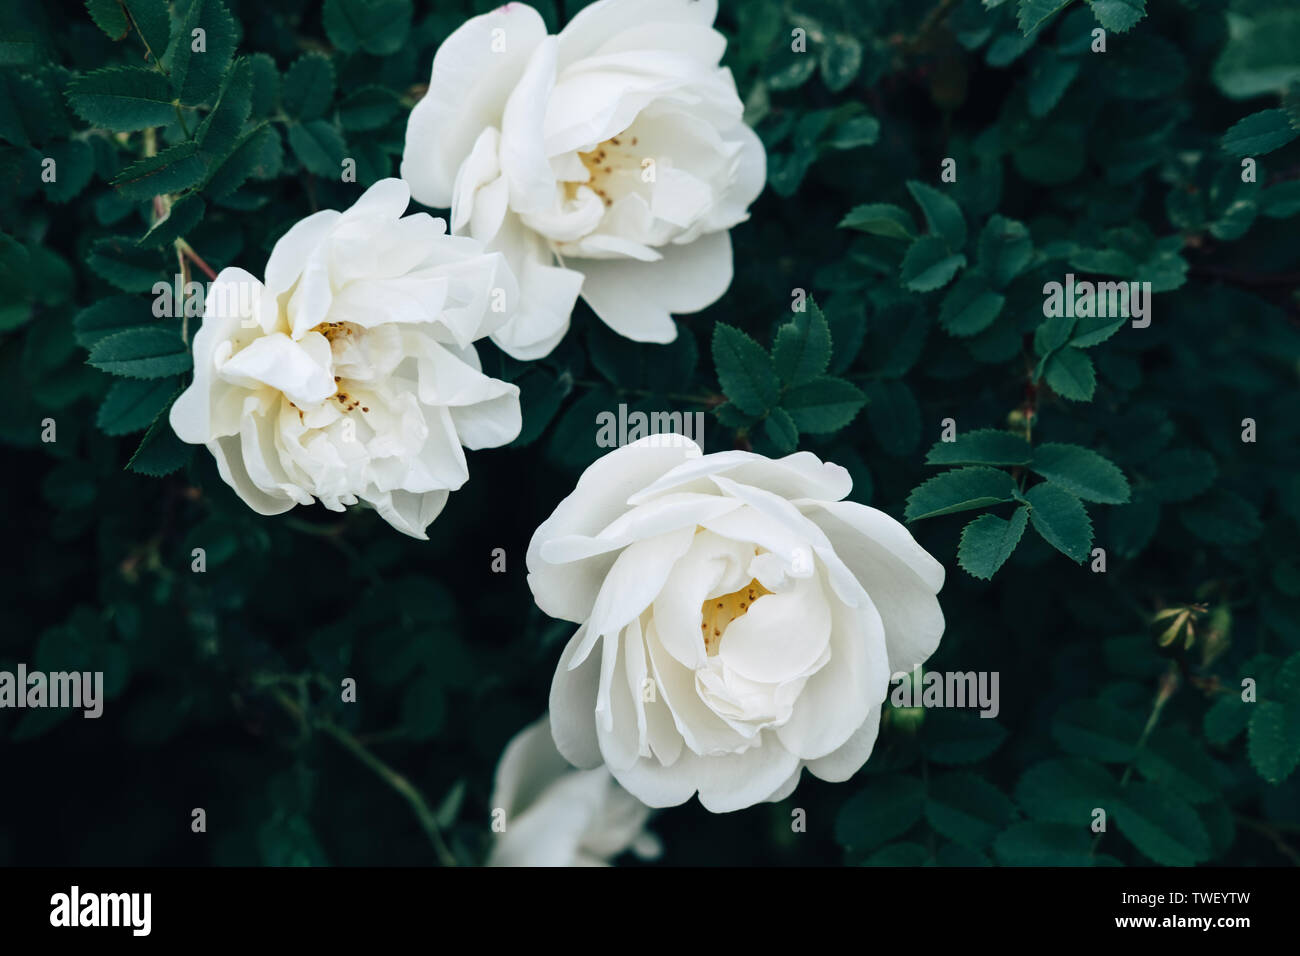 White roses in blossom closeup. Three aromatic ivory flowers, peonies with tender petals growing among dark green foliage. Traditional wedding bouquet element. Floral symbol of love and purity Stock Photo